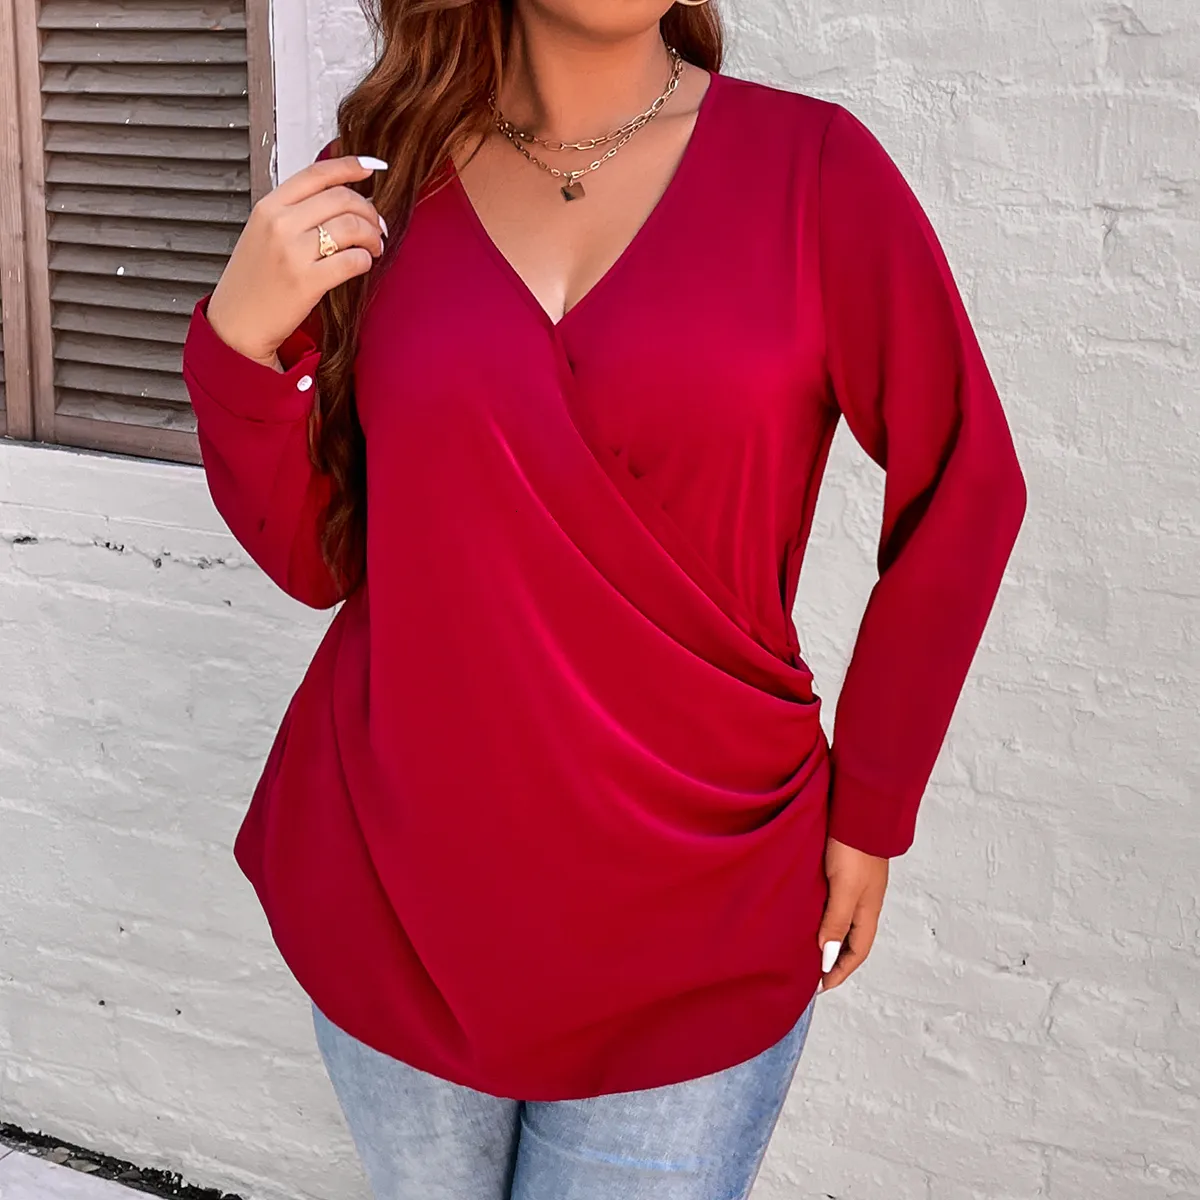 Plus Size Womens Loose Fit V Long Shirt Solid Black, V Neck, Long Sleeve,  Casual Blouse For Autumn/Winter 4XL From Mu01, $10.25